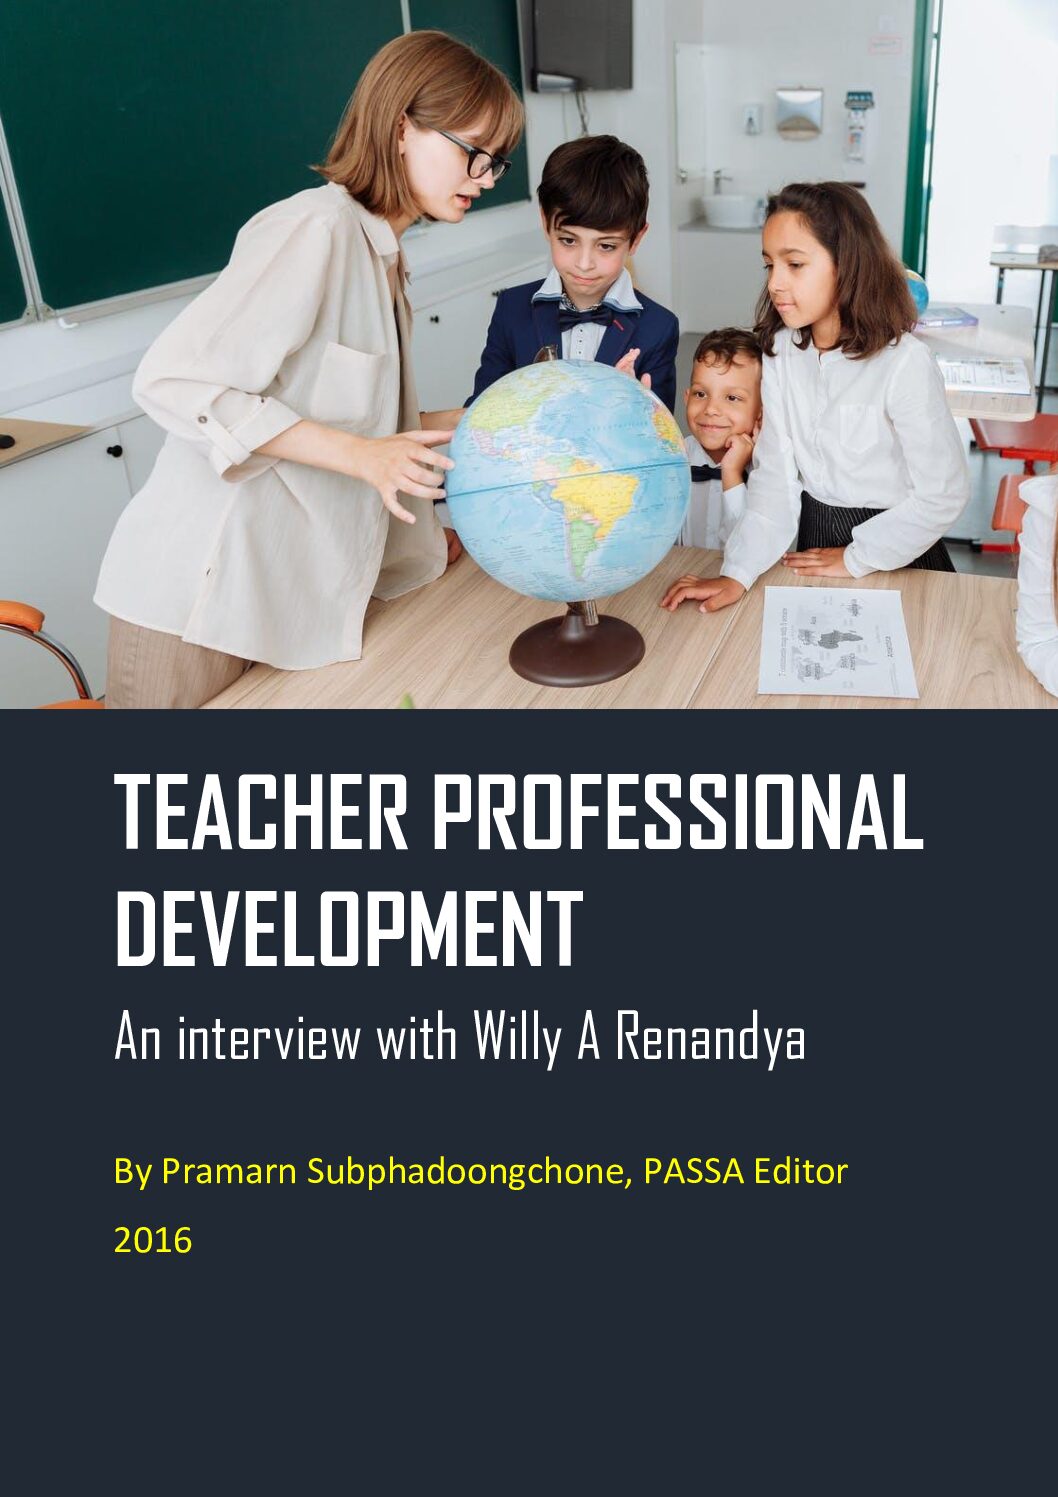 Teacher Professional Development: An Interview with Willy Renandya